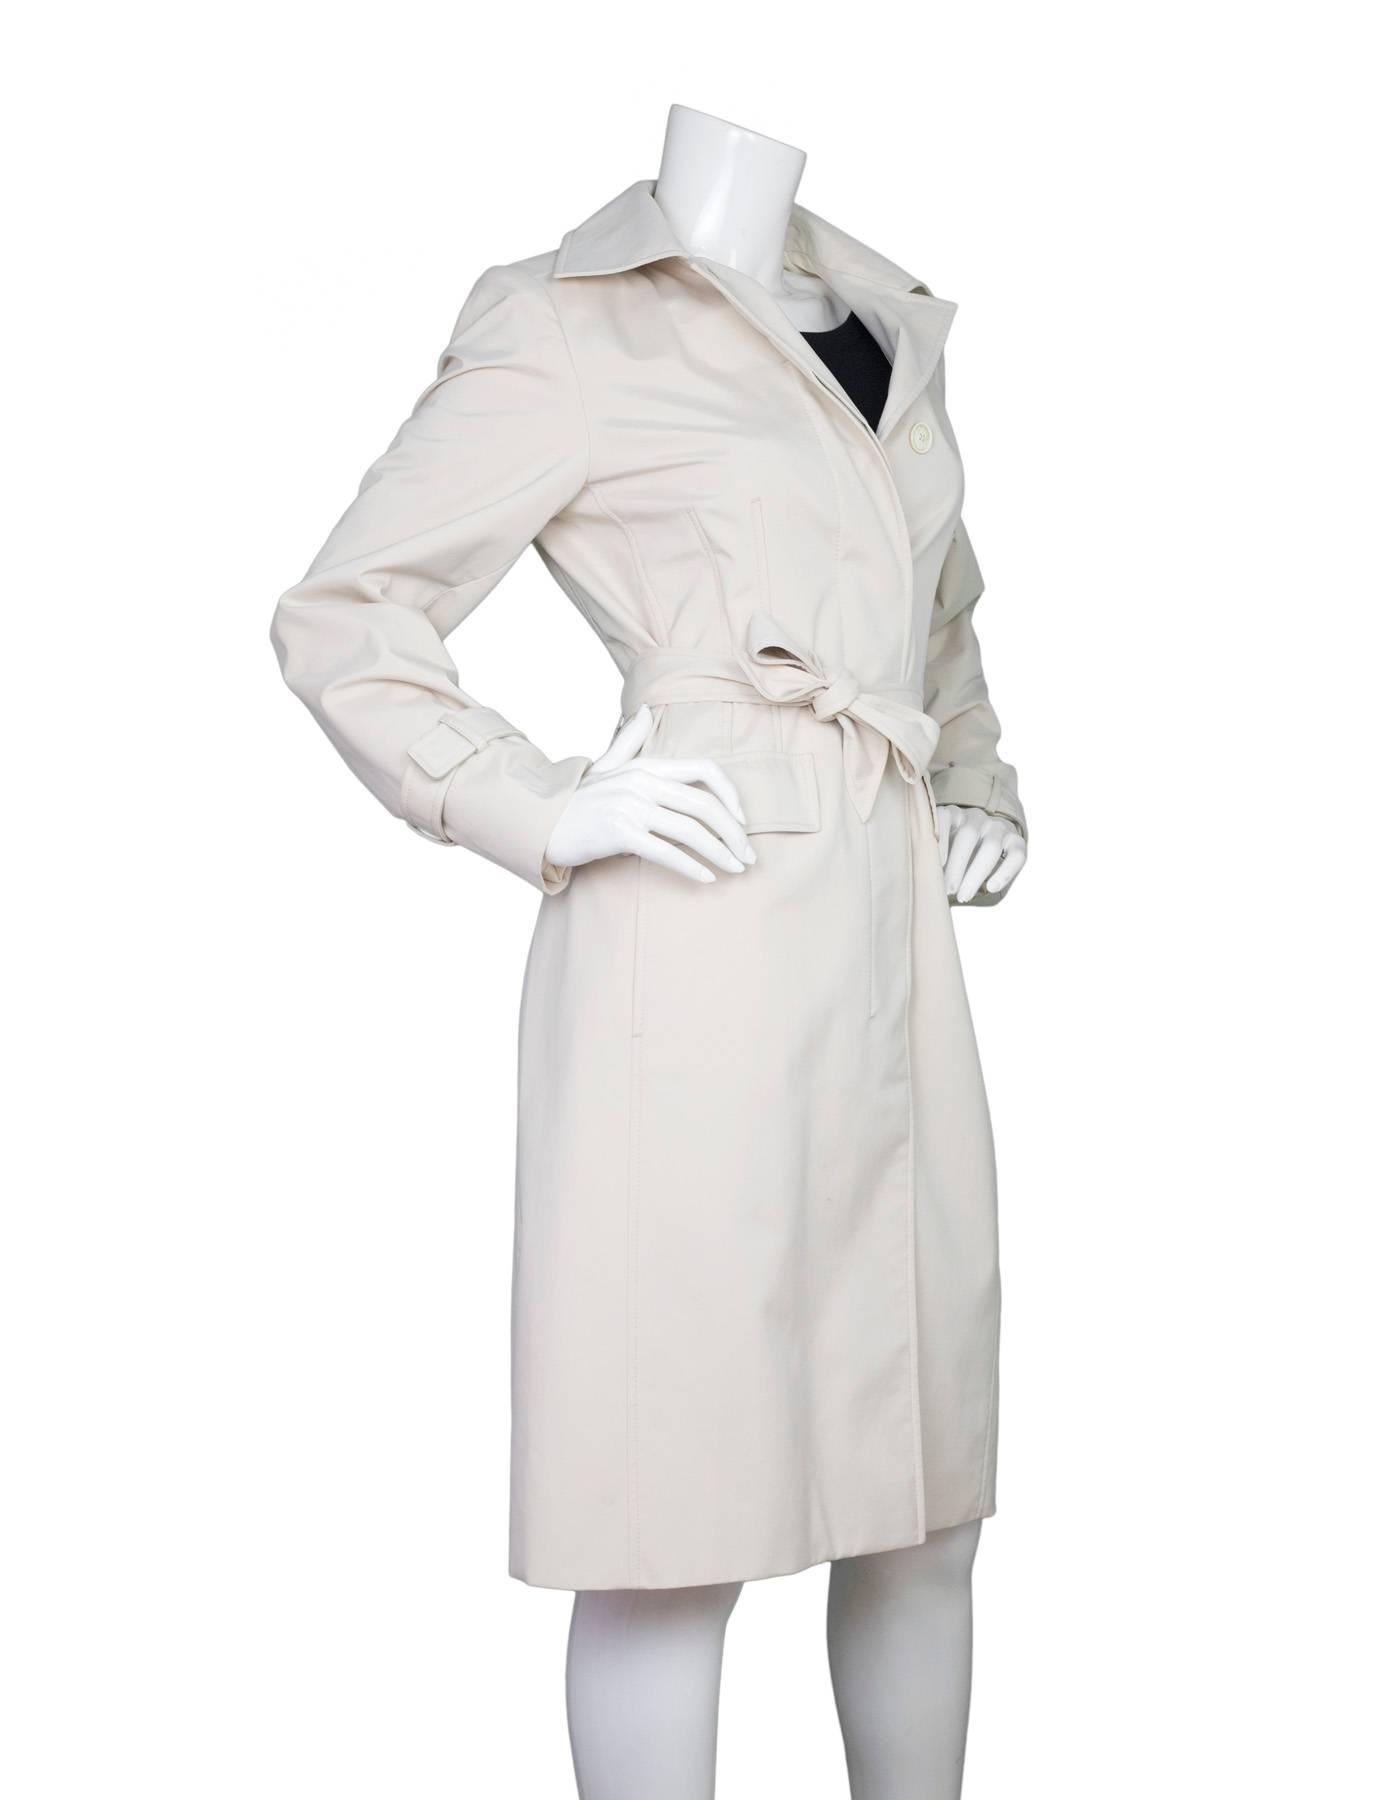 Loro Piana Storm System Beige Trench Coat 
Features optional waist belt

Made In: Italy
Color: Beige
Composition: 100% Nylon
Lining: Beige, 100% polyester
Closure/Opening: Button down front and waist belt
Exterior Pockets: Two hip pockets
Interior